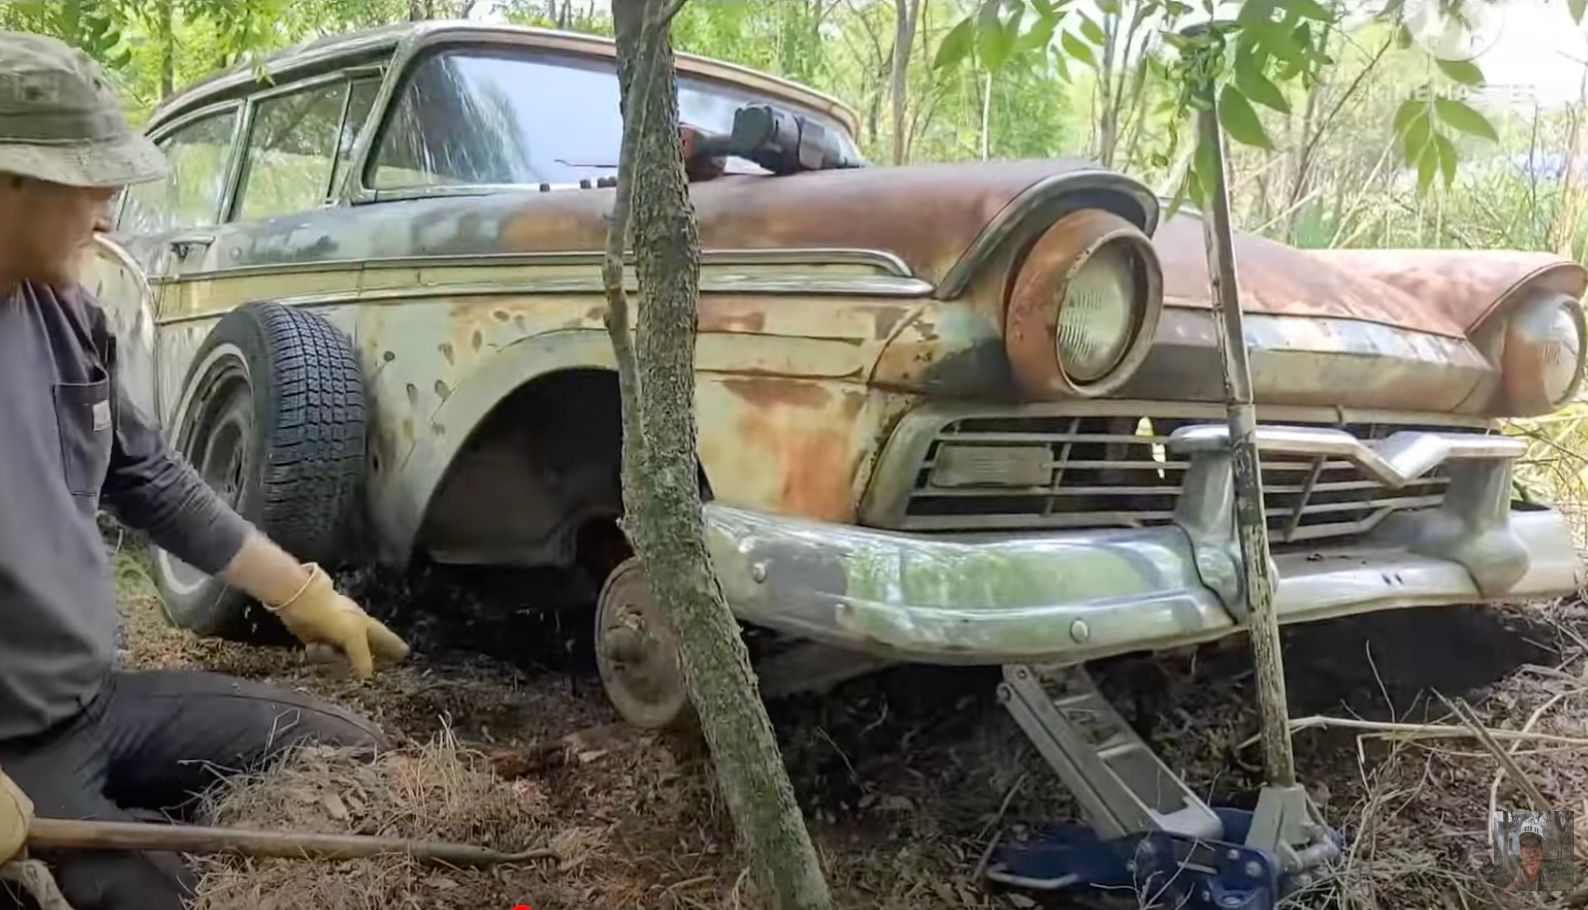 Burned Farm House Hides Classic Ford On Property